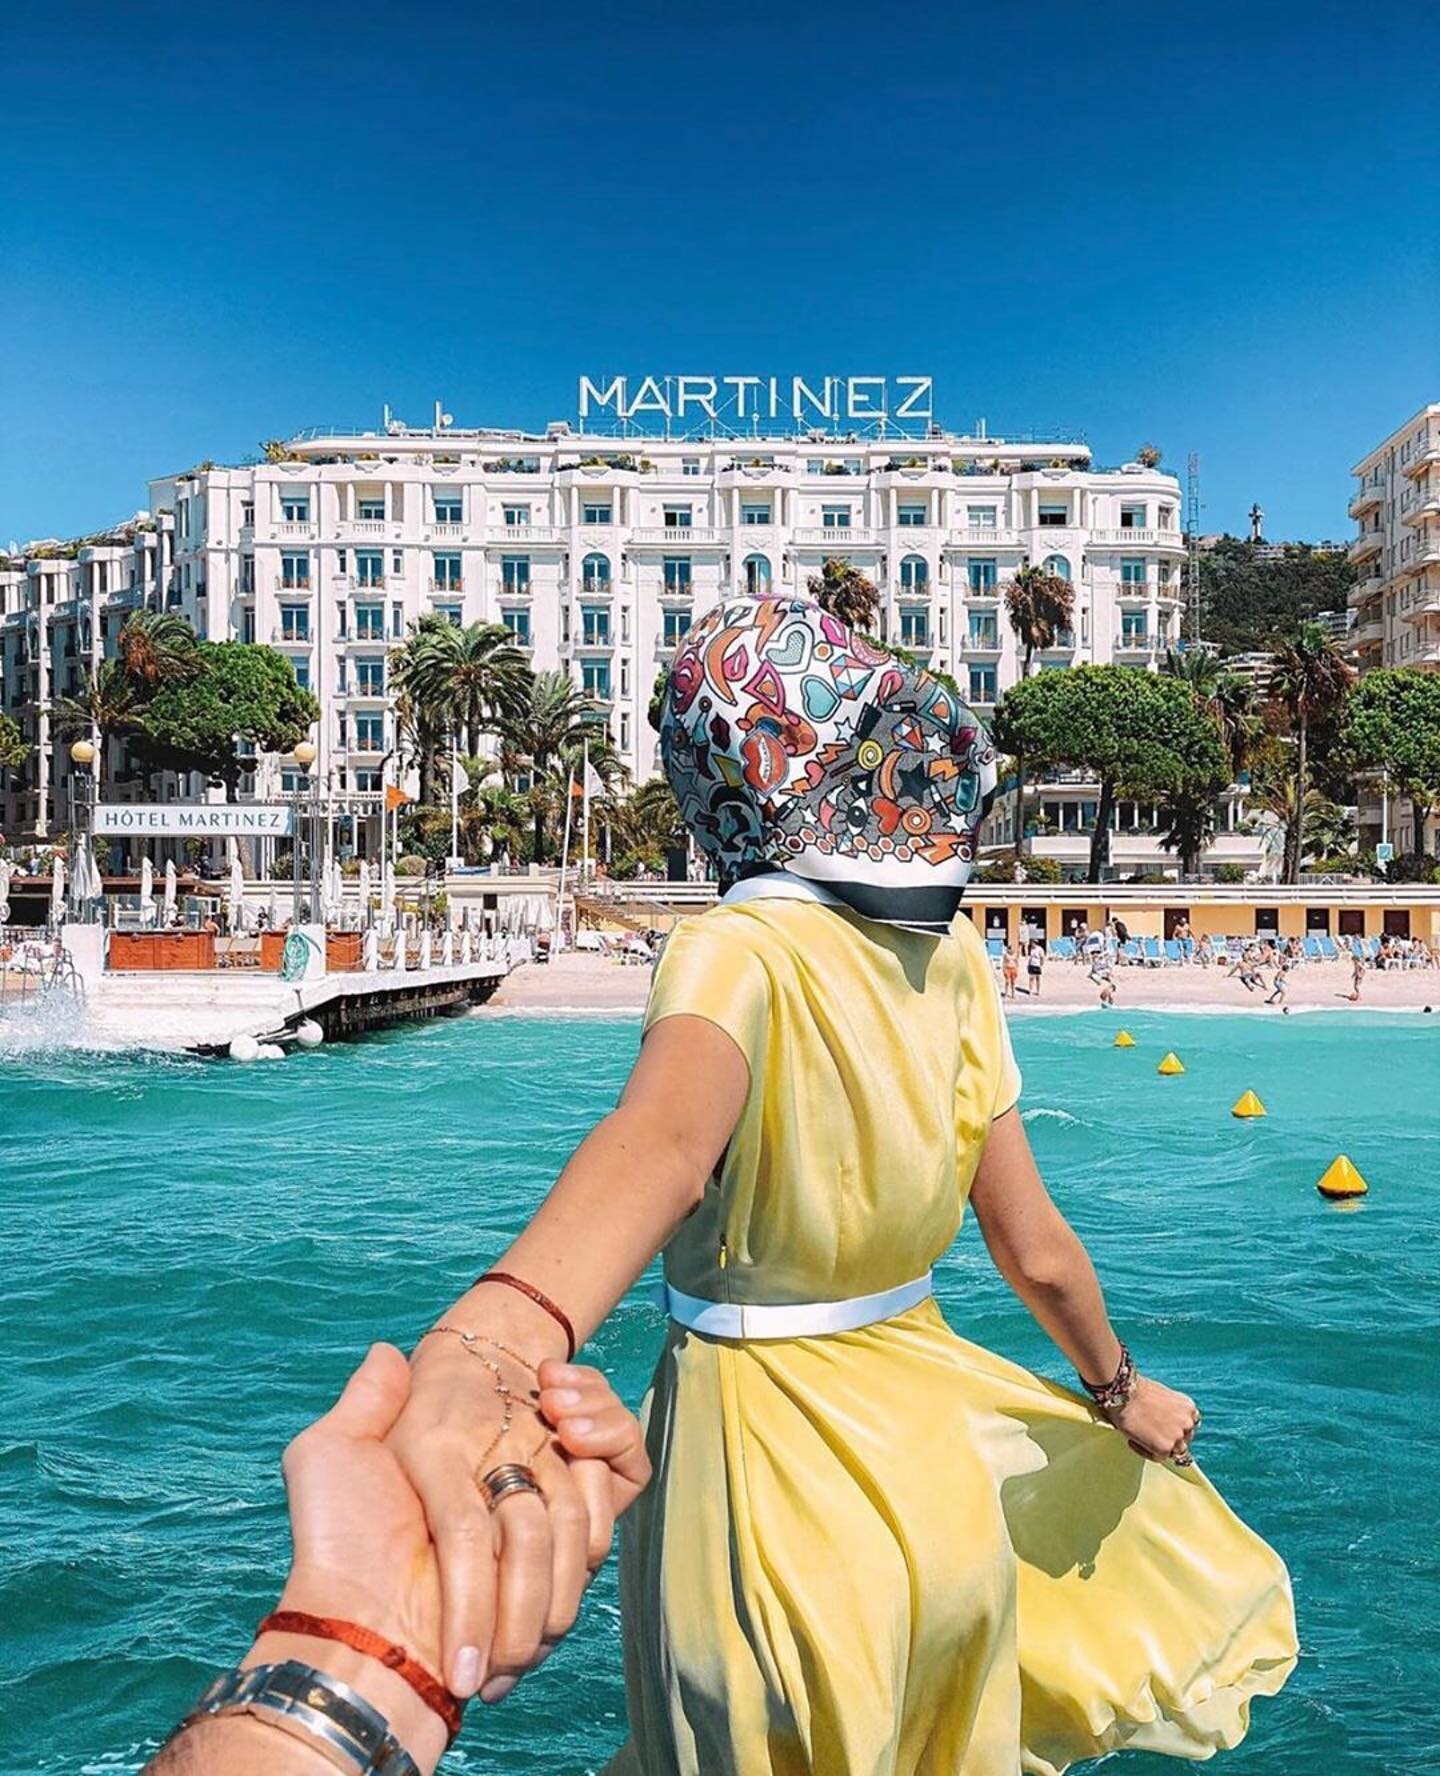 This is what the French Riviera dream looks like. 
&bull;&bull;&bull;&bull;&bull;&bull;
📍@martinezhotel in Cannes by 
📸@muradosmann
&bull;&bull;&bull;&bull;&bull;&bull;
Luxury Travel Planners  Road Trips  Healthy holidays  Yacht concierge services 